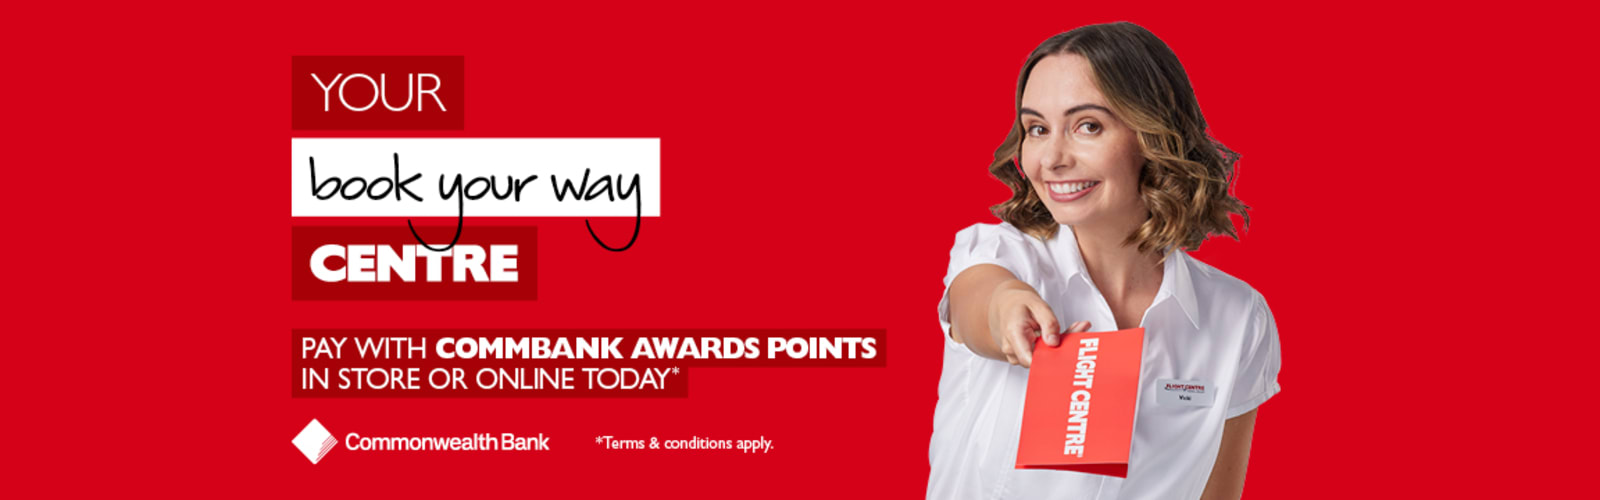 Your book your way Centre | Pay with Commbank Awards Points in store or online today | Commonwealth Bank | *Terms & conditions apply.